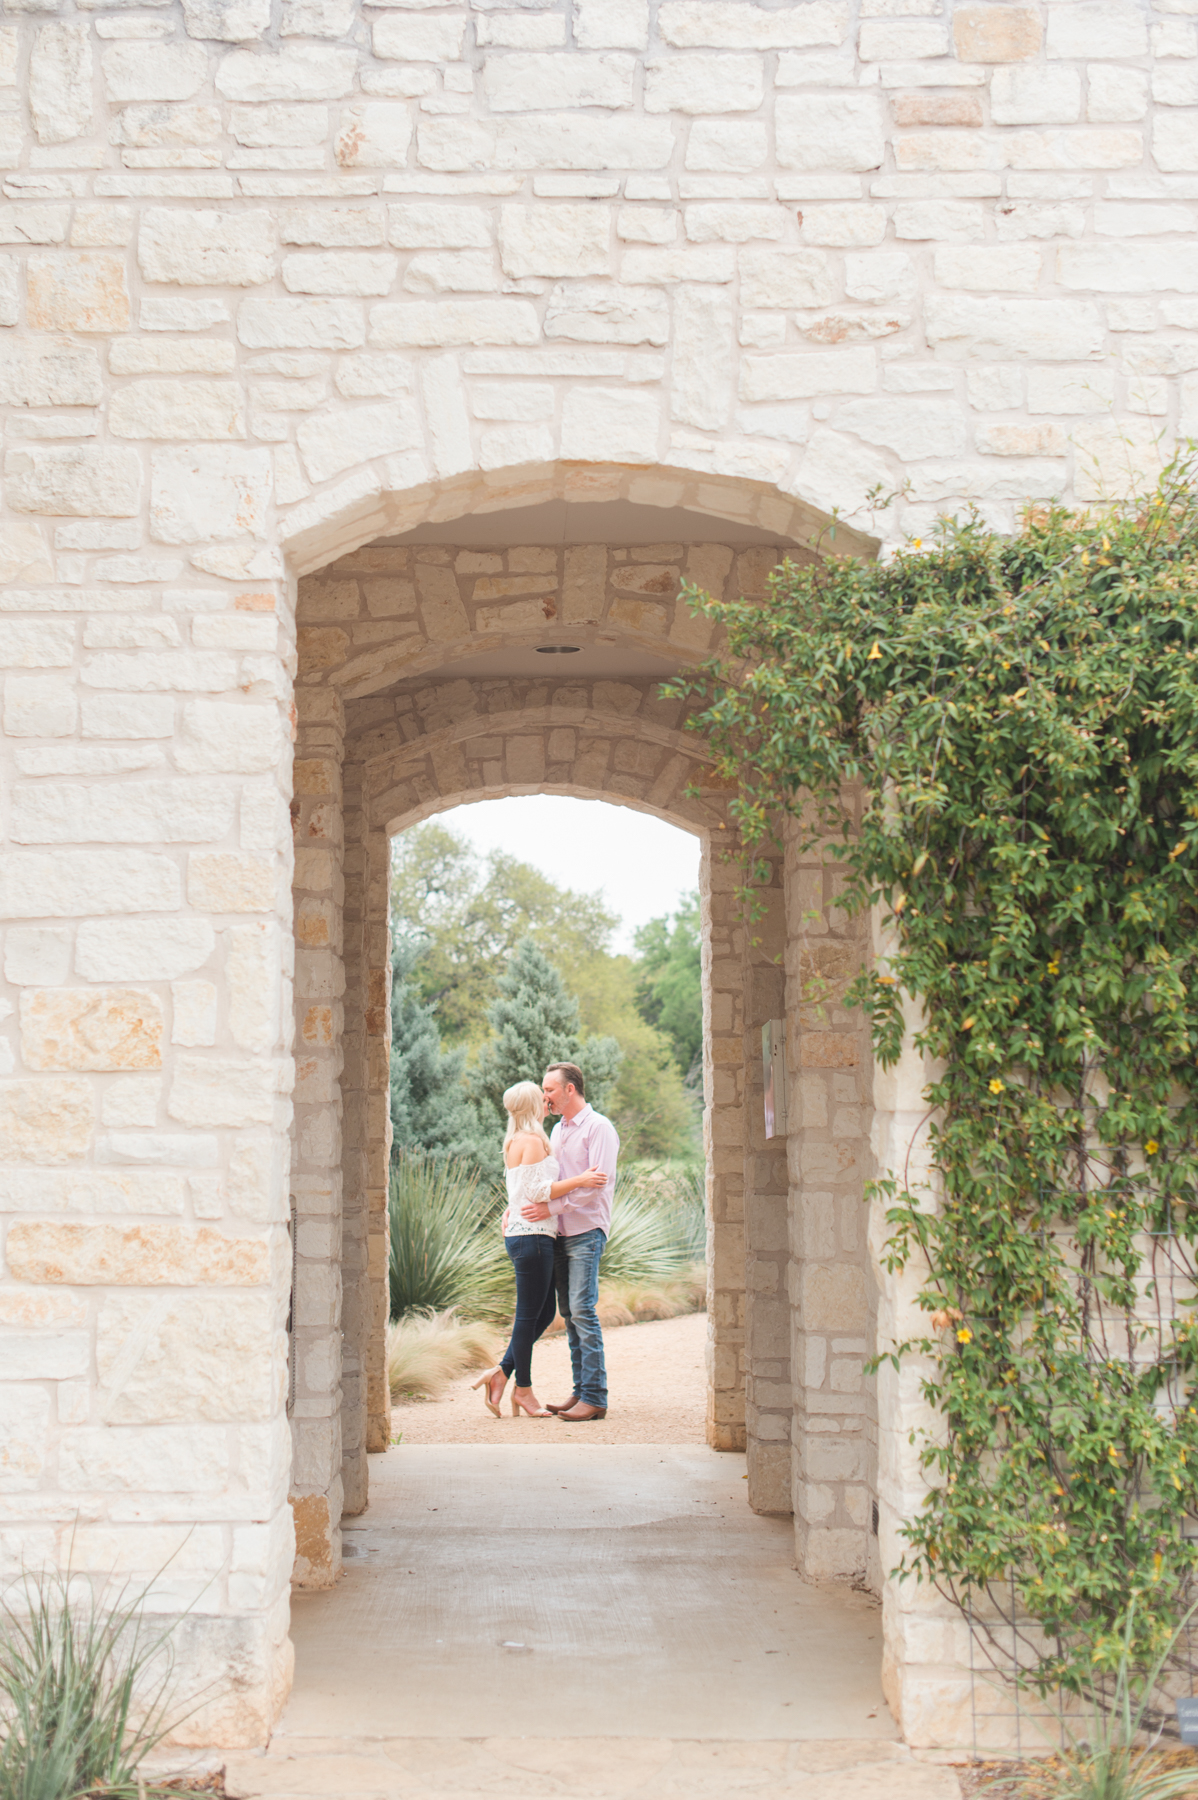 The couple kisses through the arch.